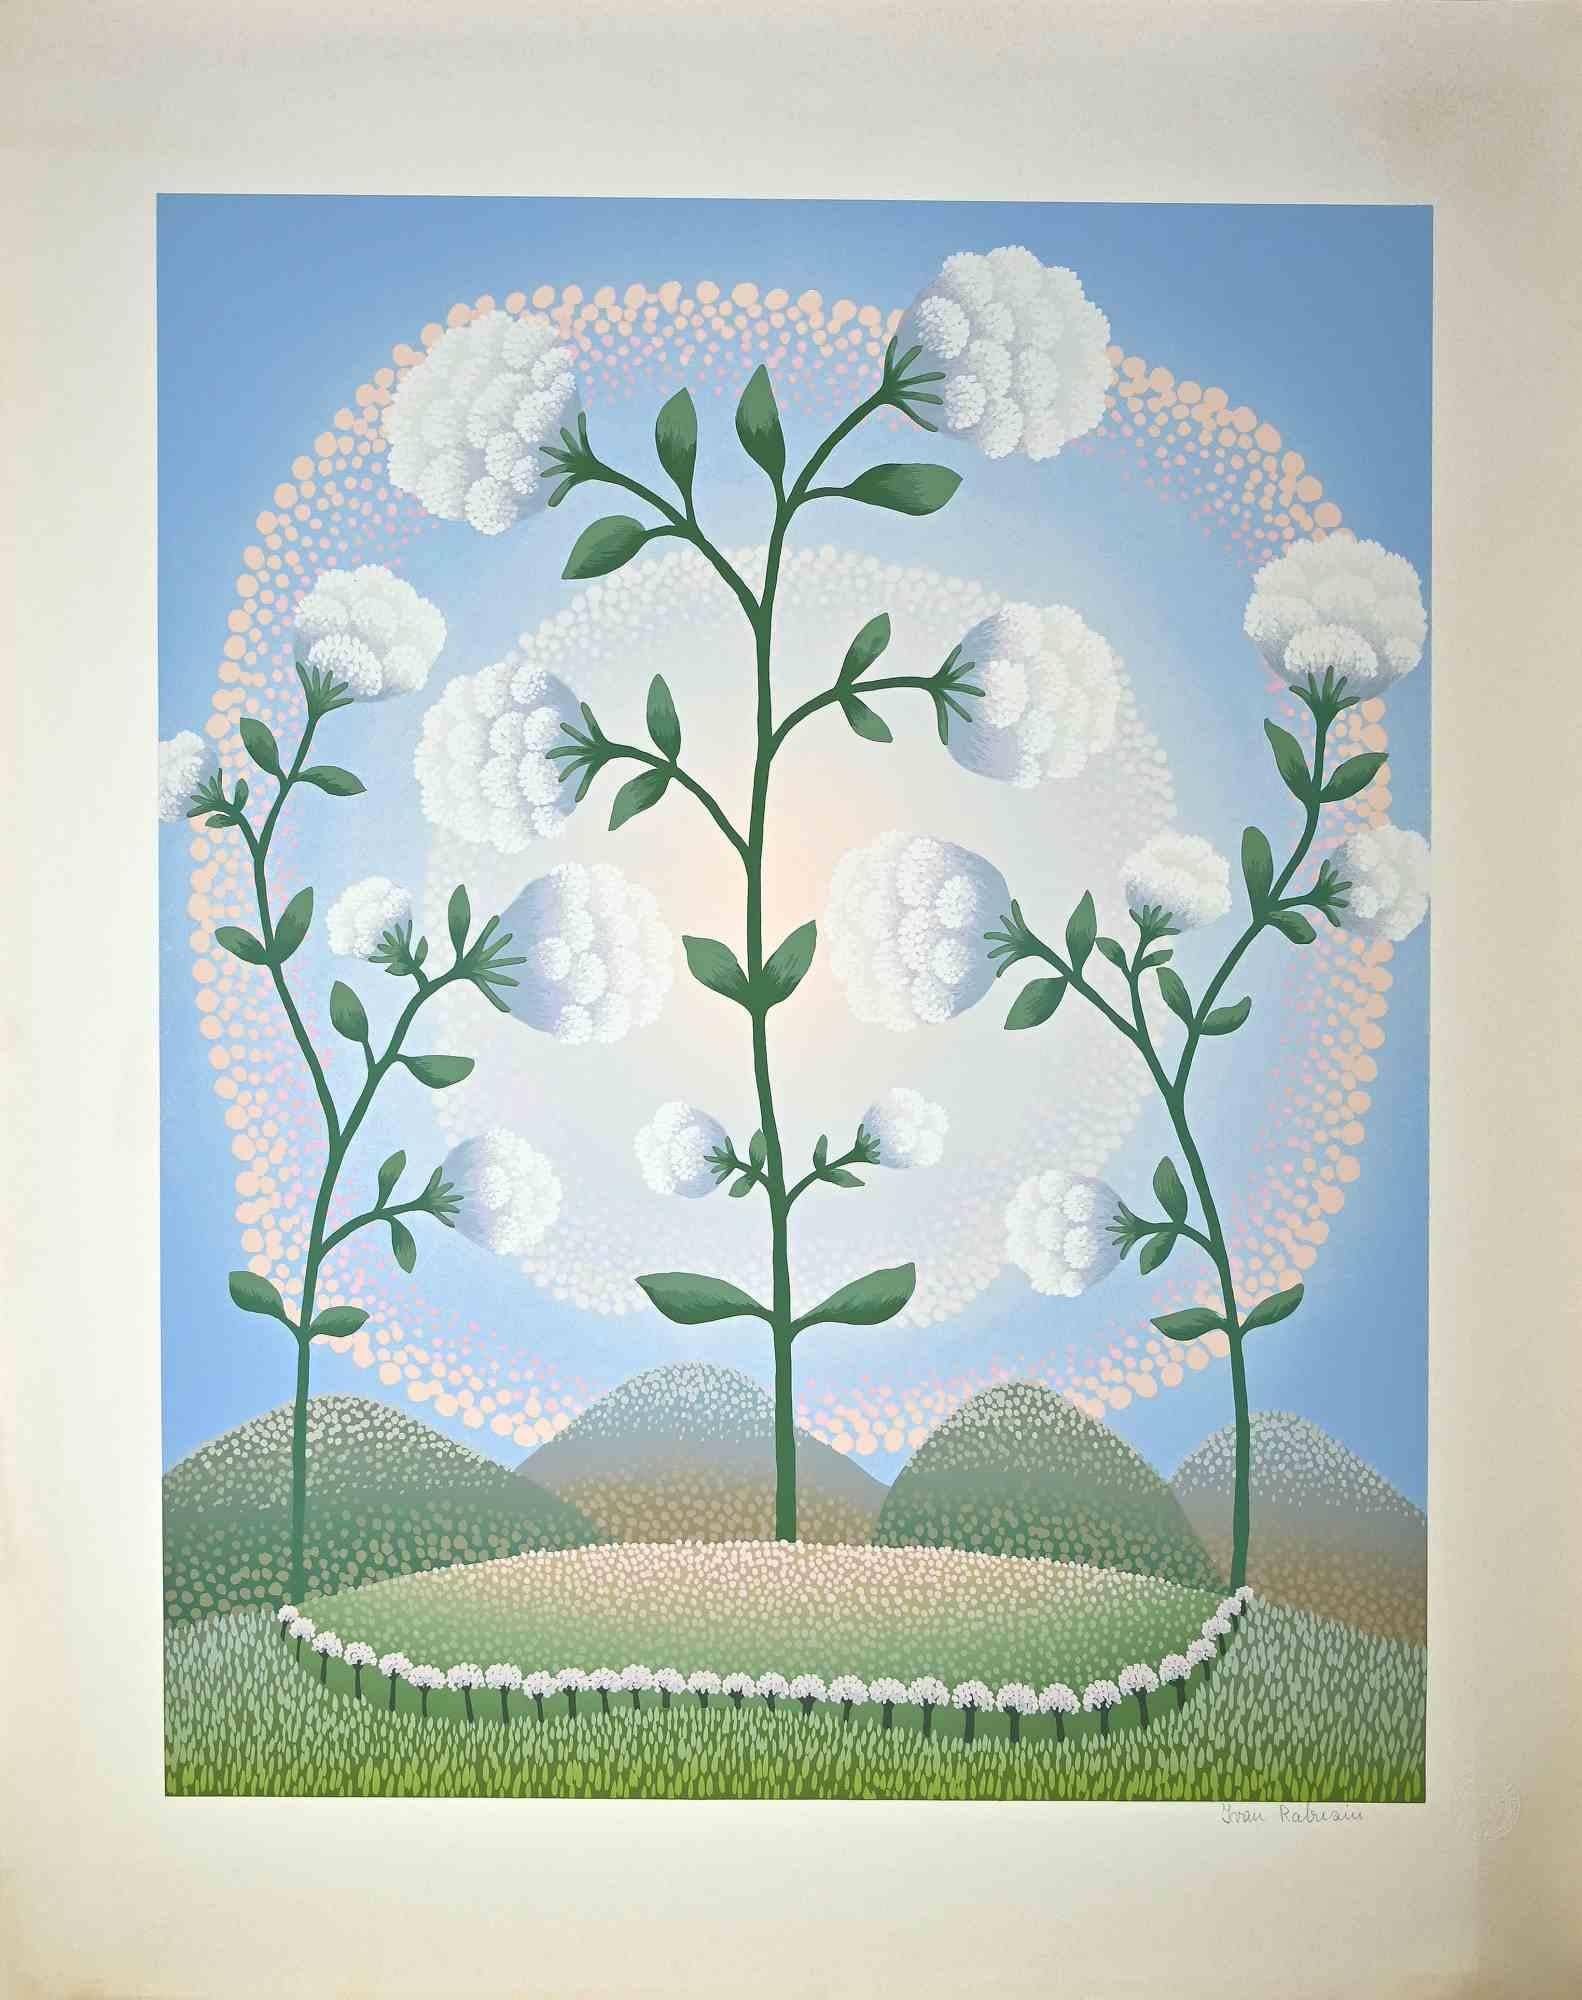 White Flowers  is an original colored screen print on paper realized by Ivan Rabuzin in the 1990s.

Hand-signed in pencil on the lower margin.  Artist's proof. 

Excellent conditions. 

This very fine print, representing white flowers rising among